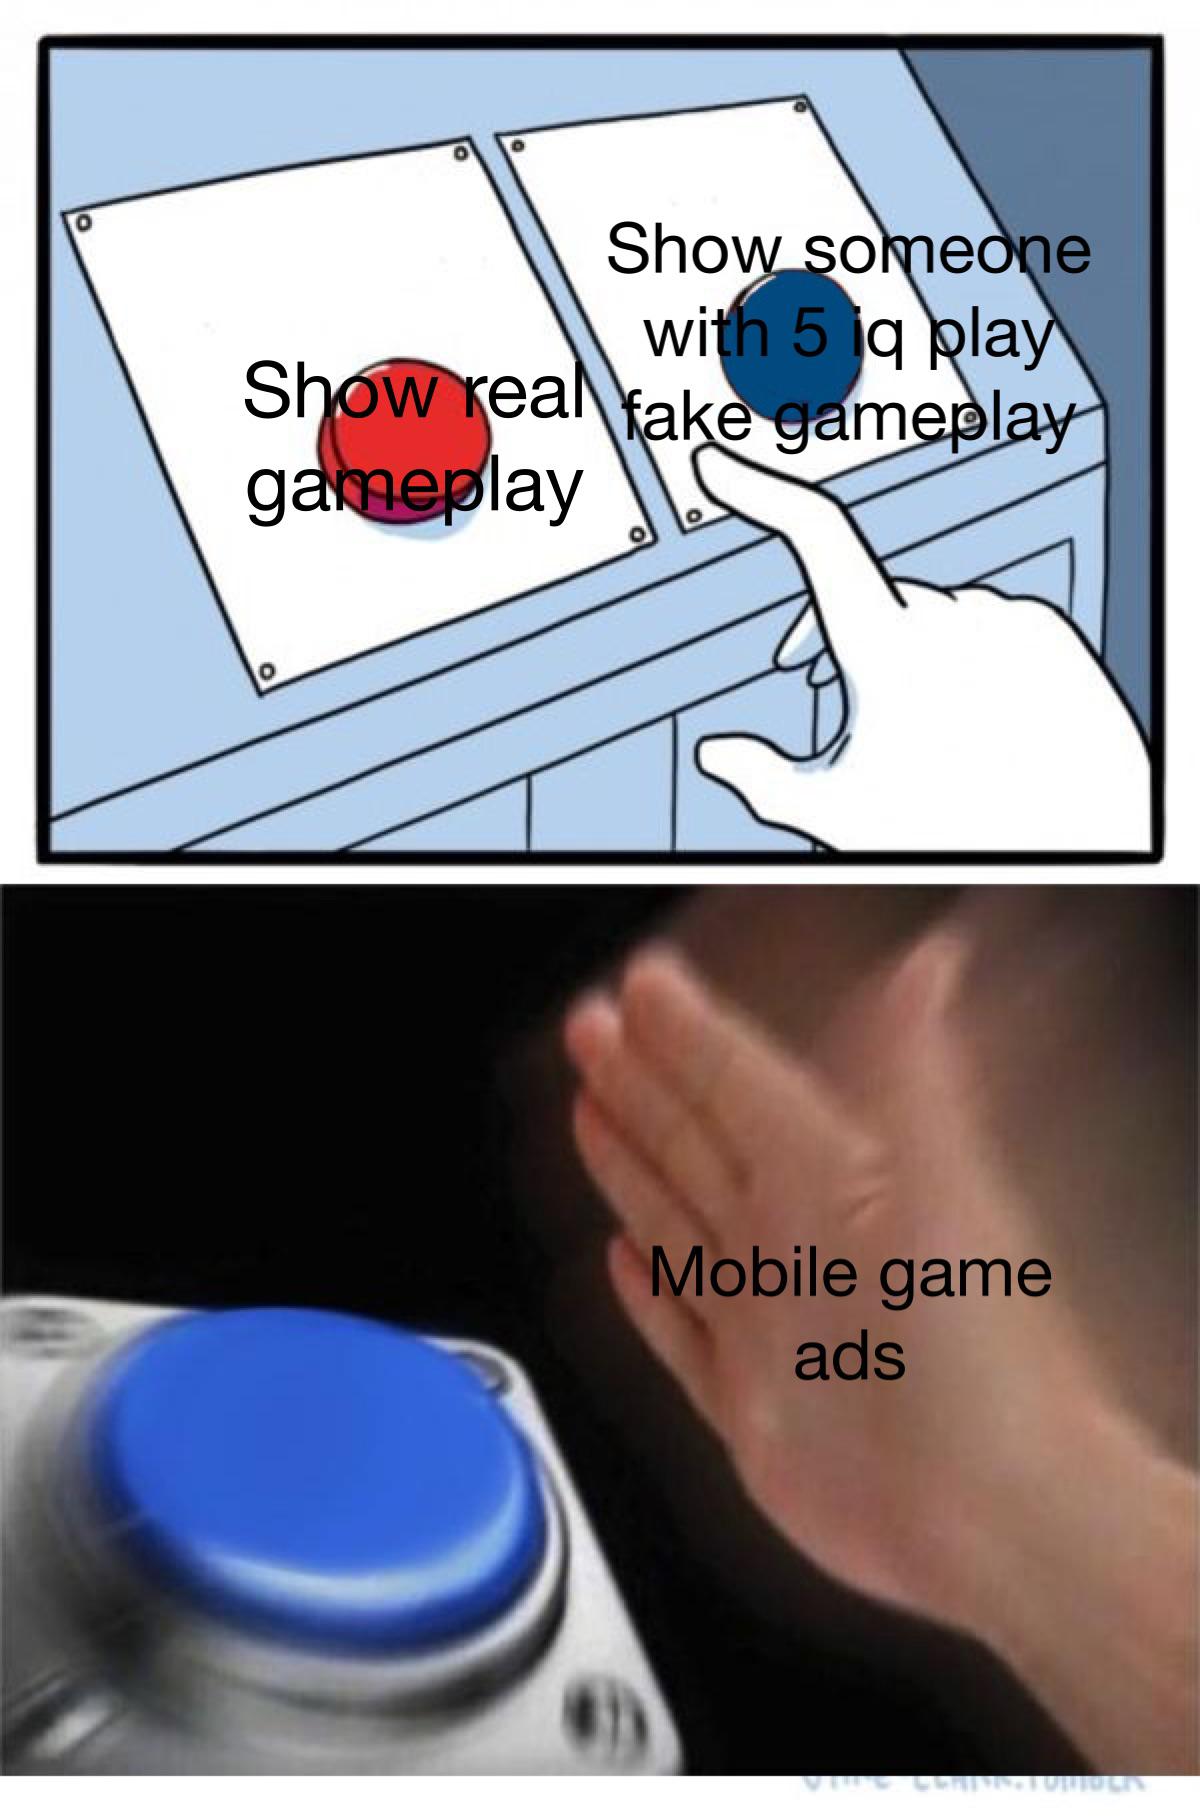 gaming memes - hand - Show someone with 5 iq play Show real fake gameplay gameplay Mobile game ads